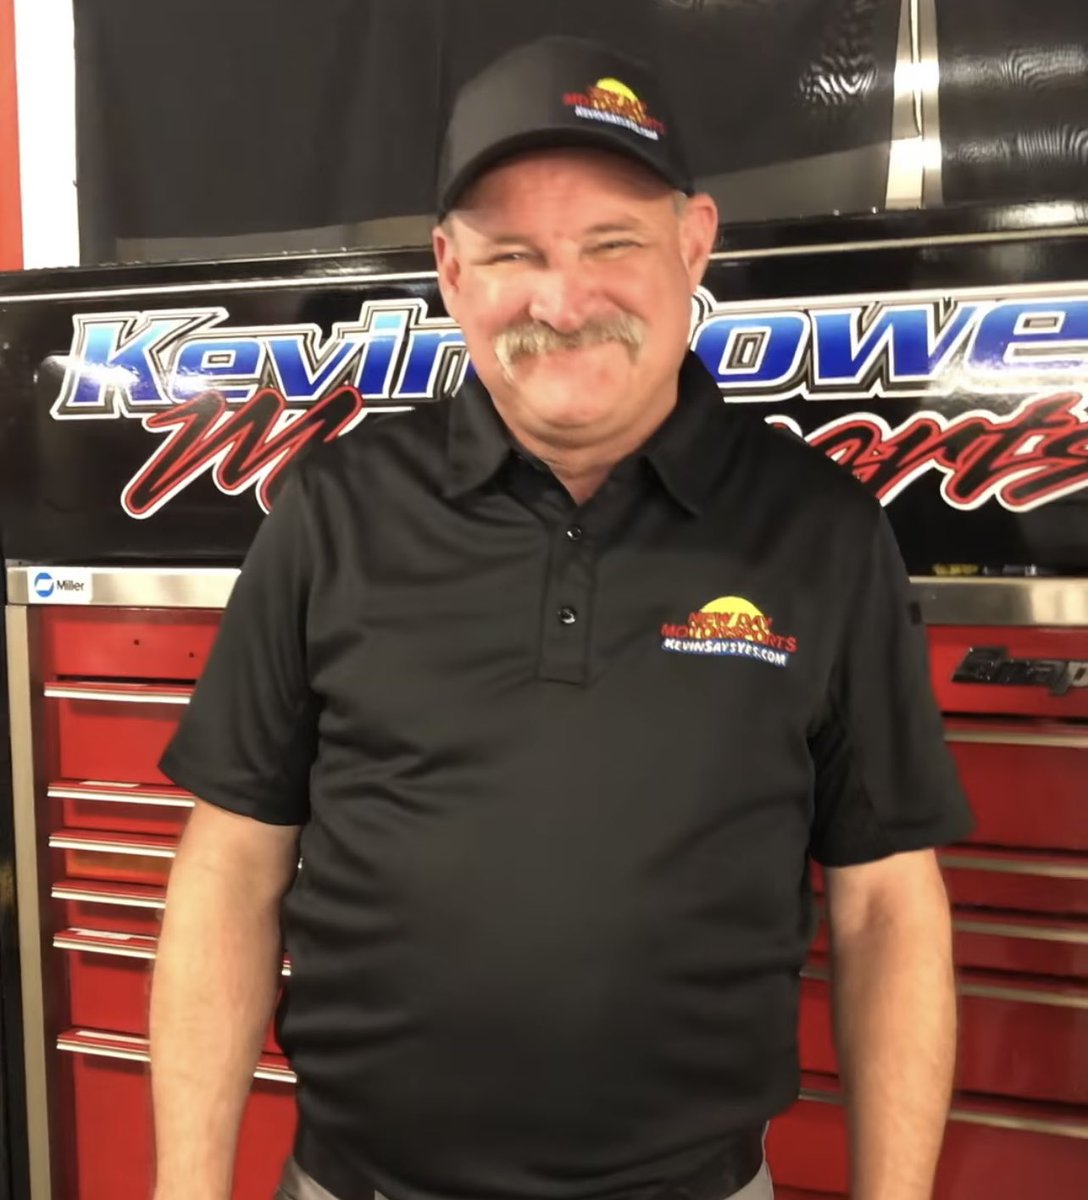 It’s always good to see your work on someone with a big smile! Now we just need him to say Crazy Kevin Powell !!!!
.
.
.
#1stplaceembroidery #newdaymotorsports #crazykevinpowell #smile #kevinsaysyes